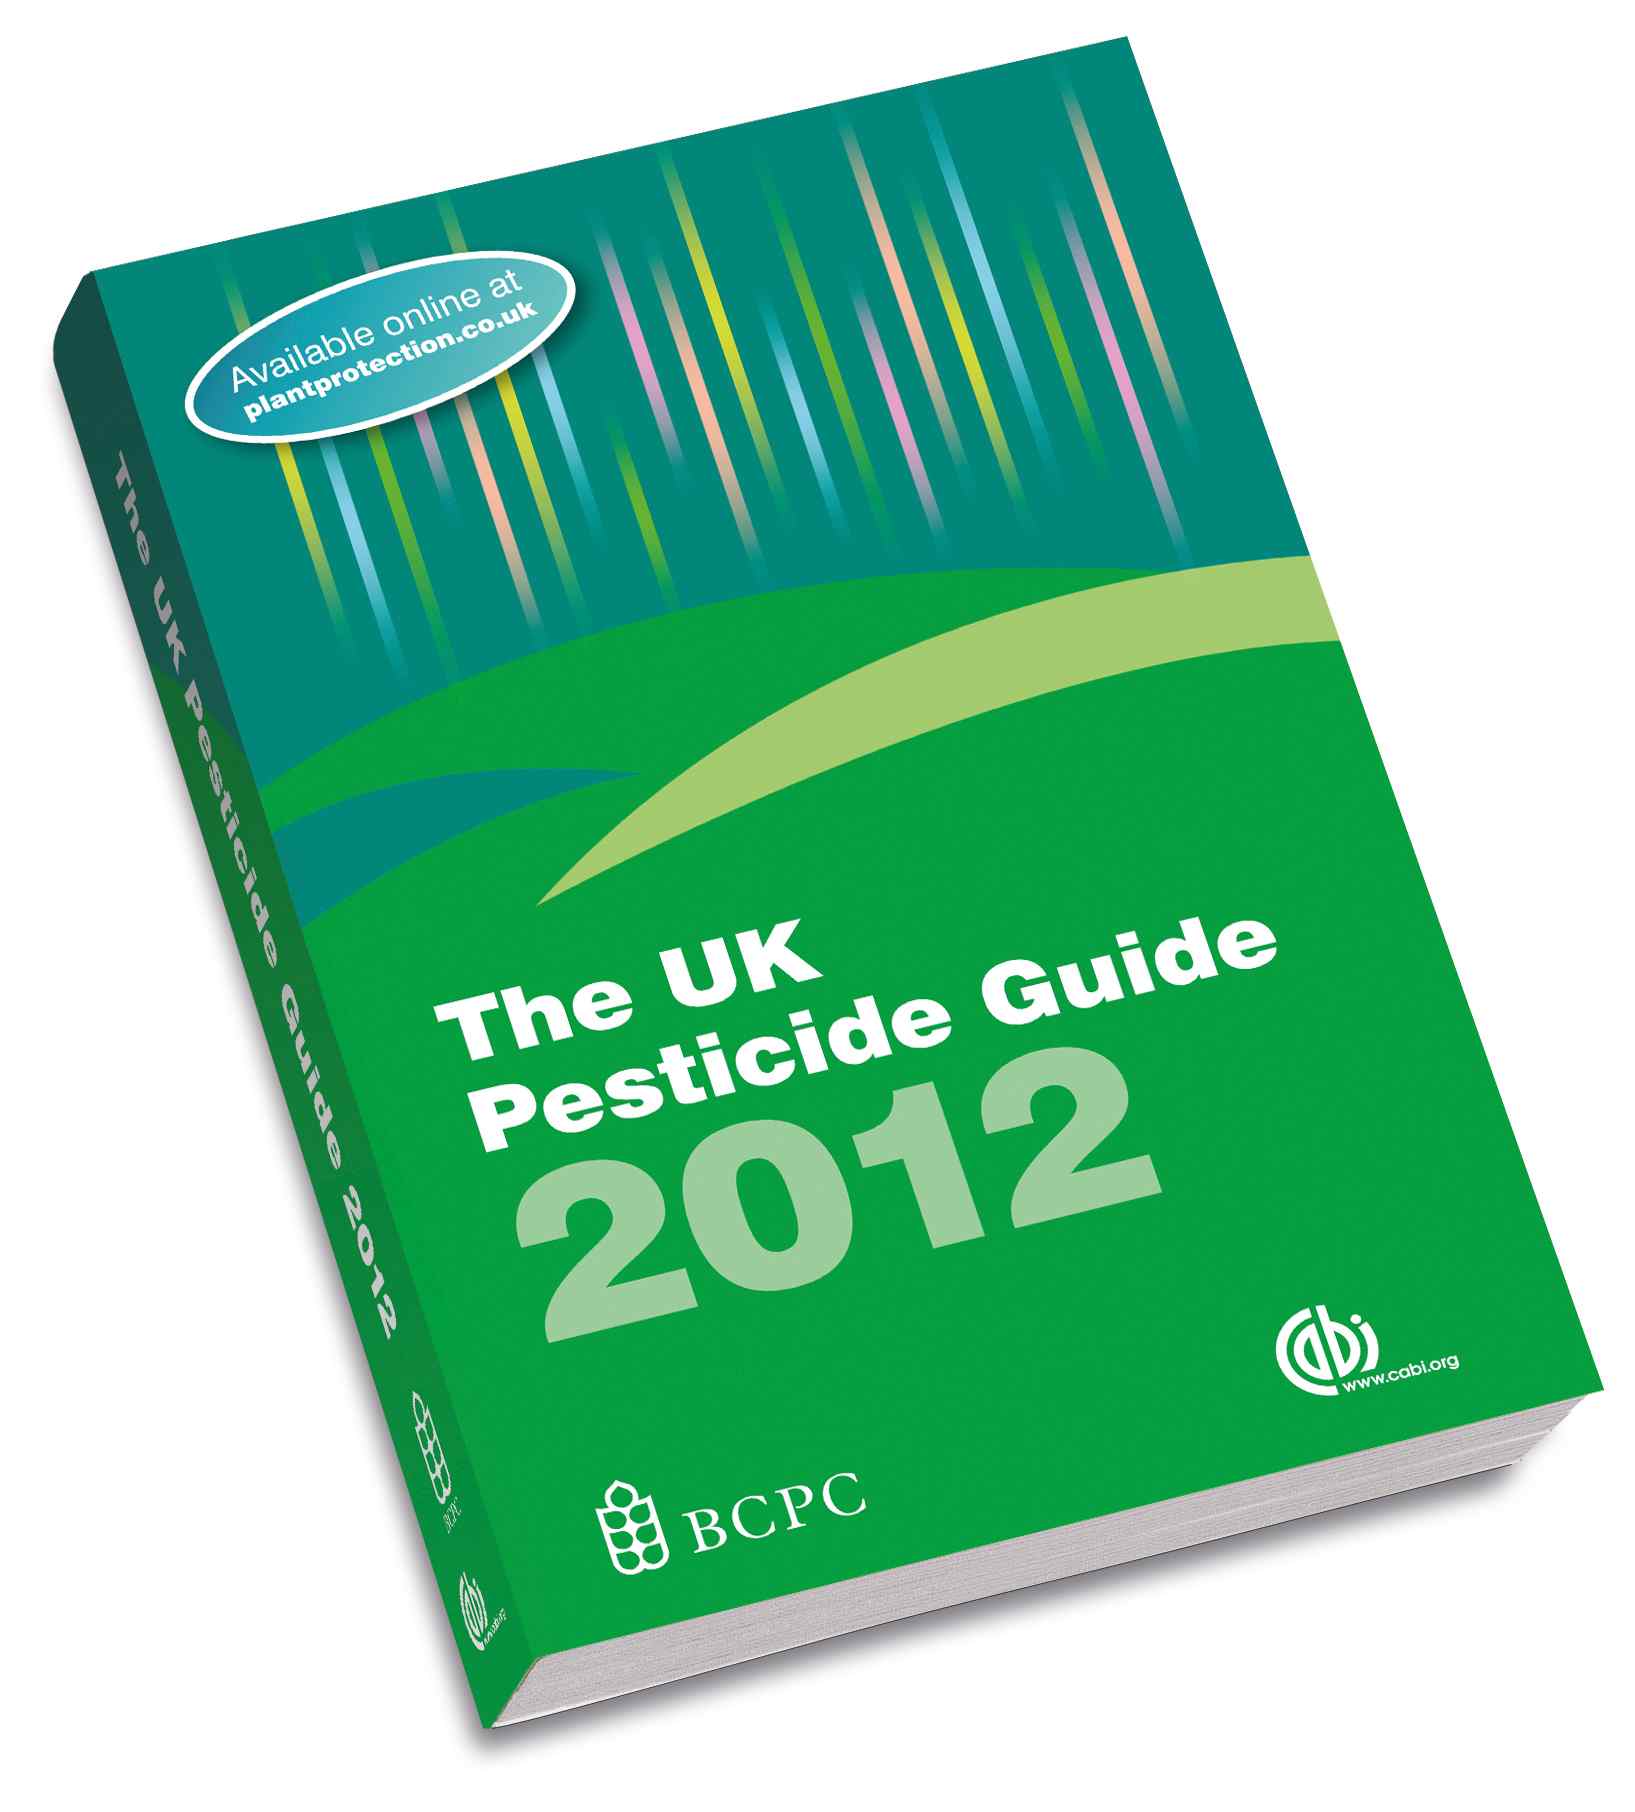 The UK Pesticide Guide 2012 - now in stock